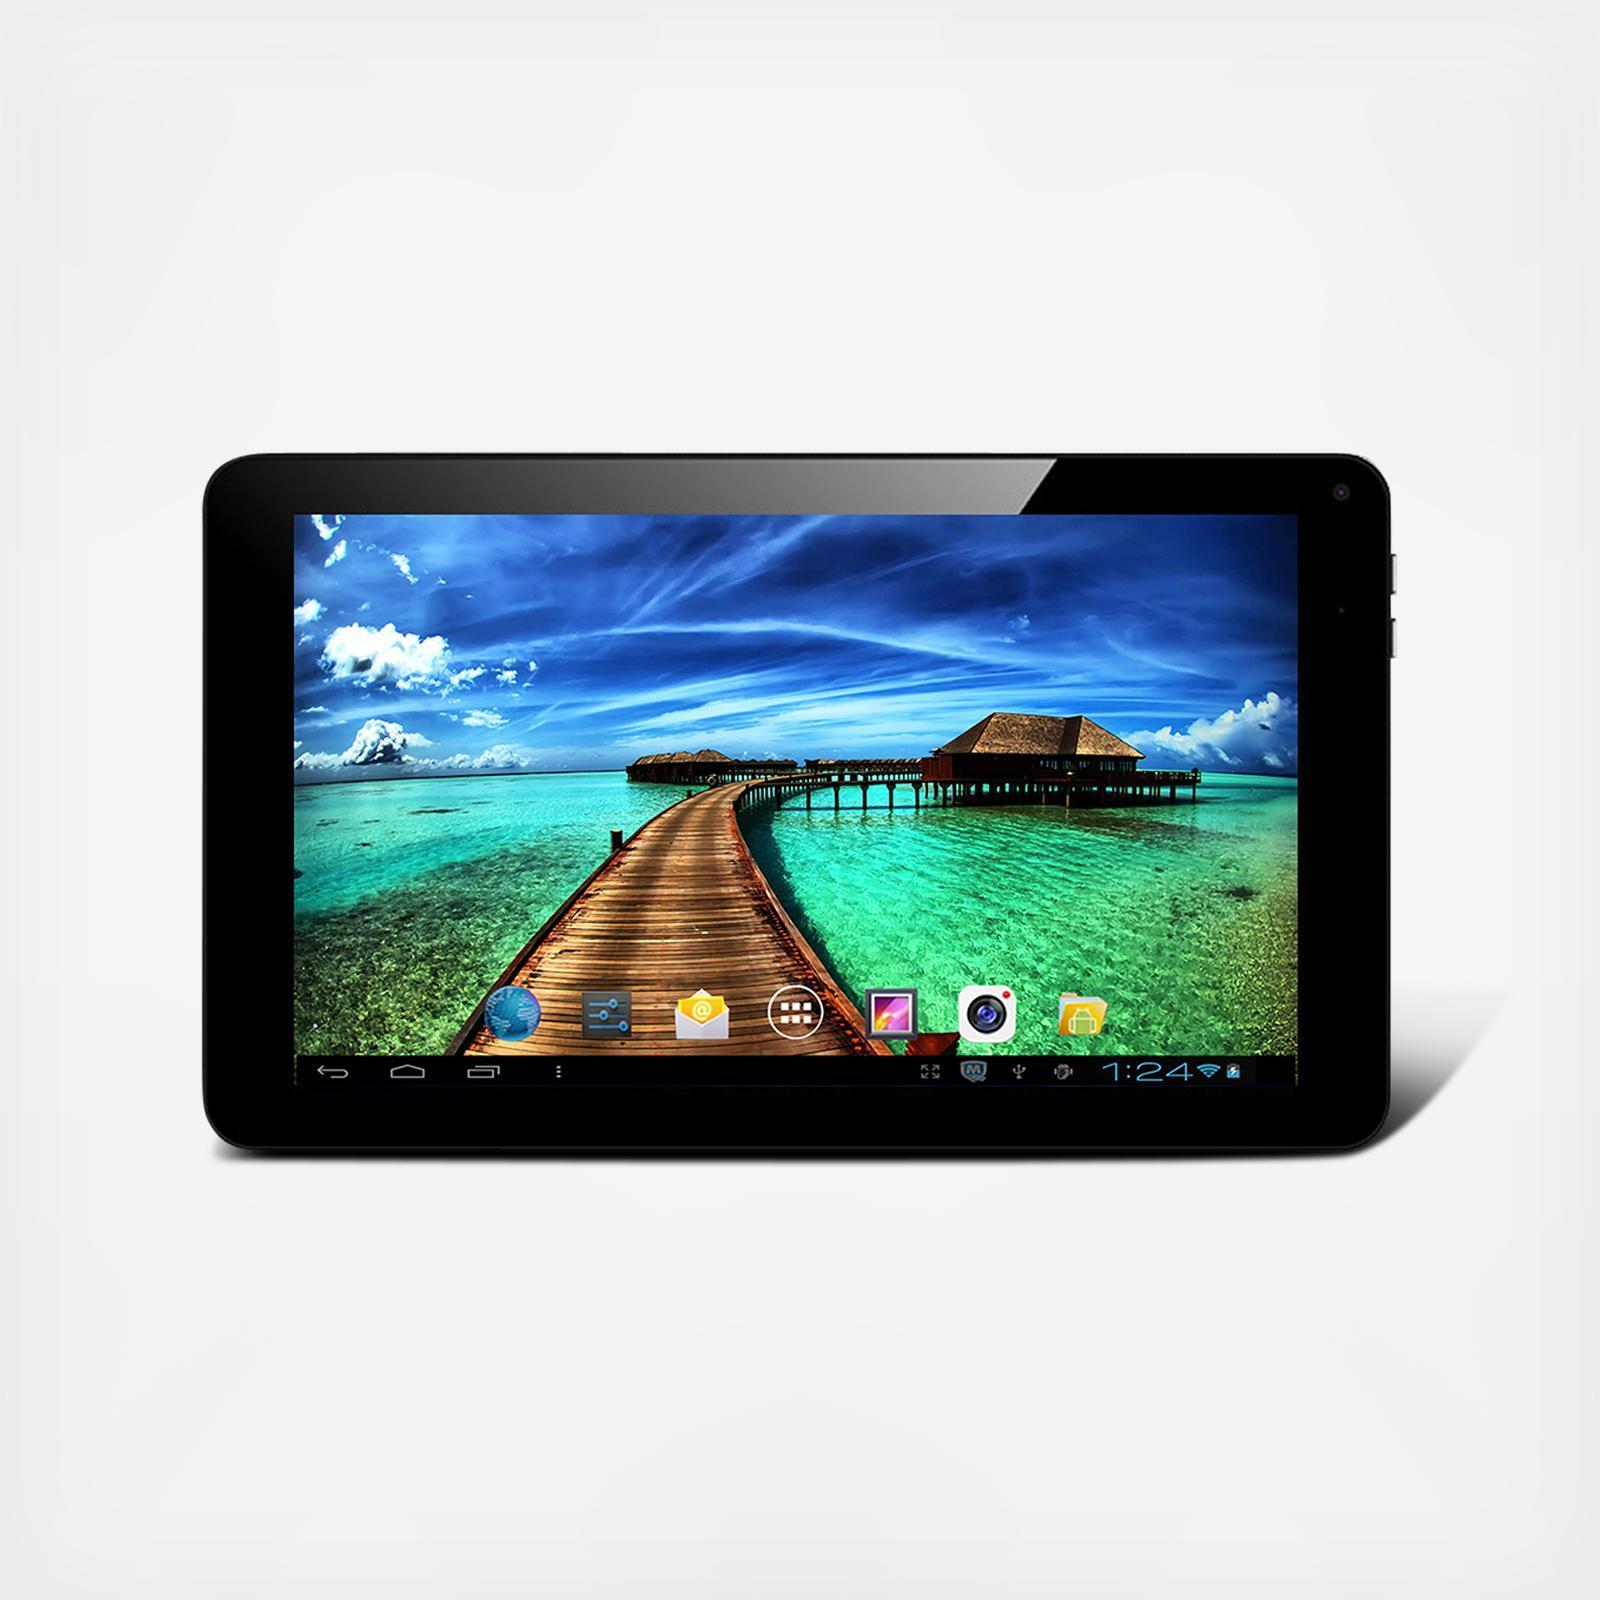 Supersonic 9 8 Gb Android Tablet Zola